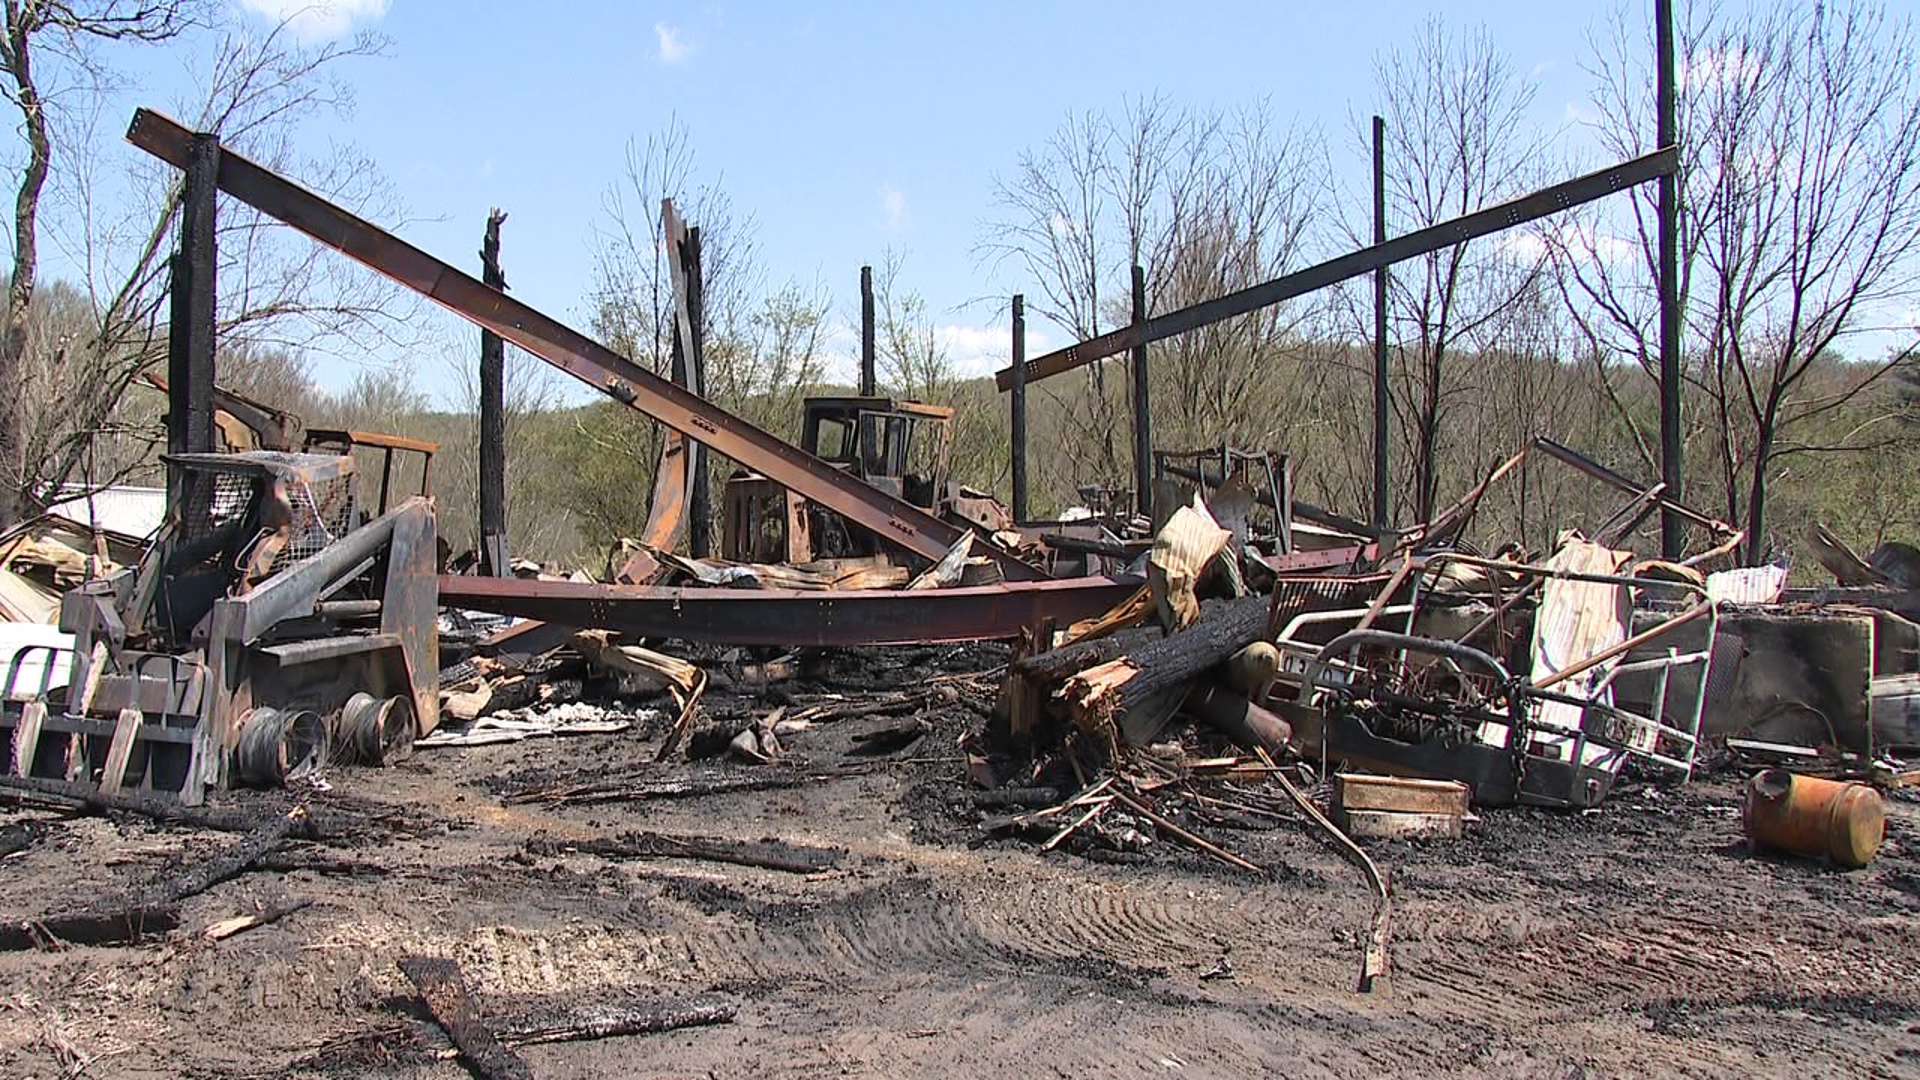 Newswatch 16's Stacy Lange spoke with the owner, who is determined to rebuild after a devastating fire on Sunday.